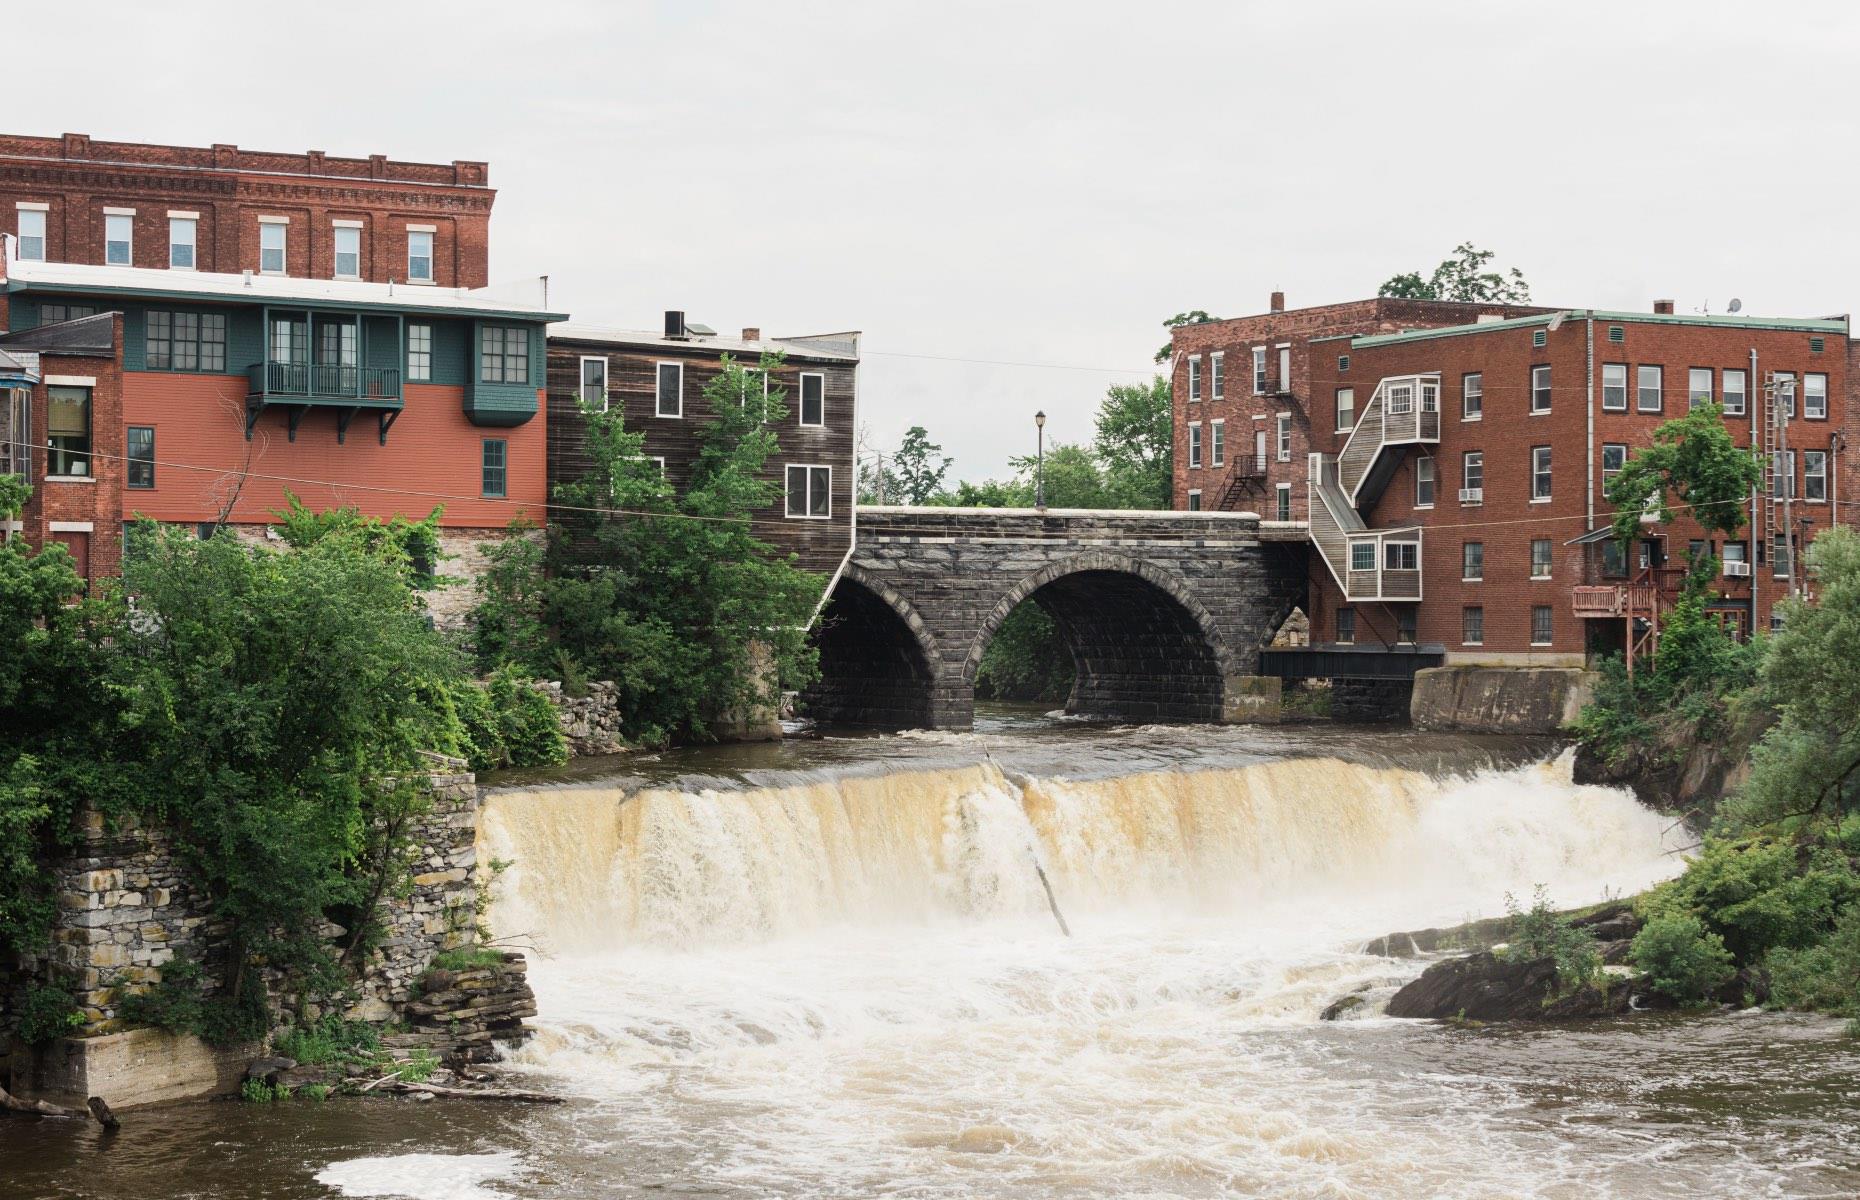 This centuries-old mill town is now home to a college and a burgeoning craft brewery and distillery scene that can be sampled on the Middlebury Tasting Trail. Set on Otter Creek, Middlebury has oodles of history too, and you can soak it all up at the Henry Sheldon Museum of Vermont History or the Vermont Folklife Center. As well as a collection of gorgeous heritage buildings, the town is home to Vermont’s oldest covered wooden bridge – Pulp Mill Bridge – which dates back to 1820.